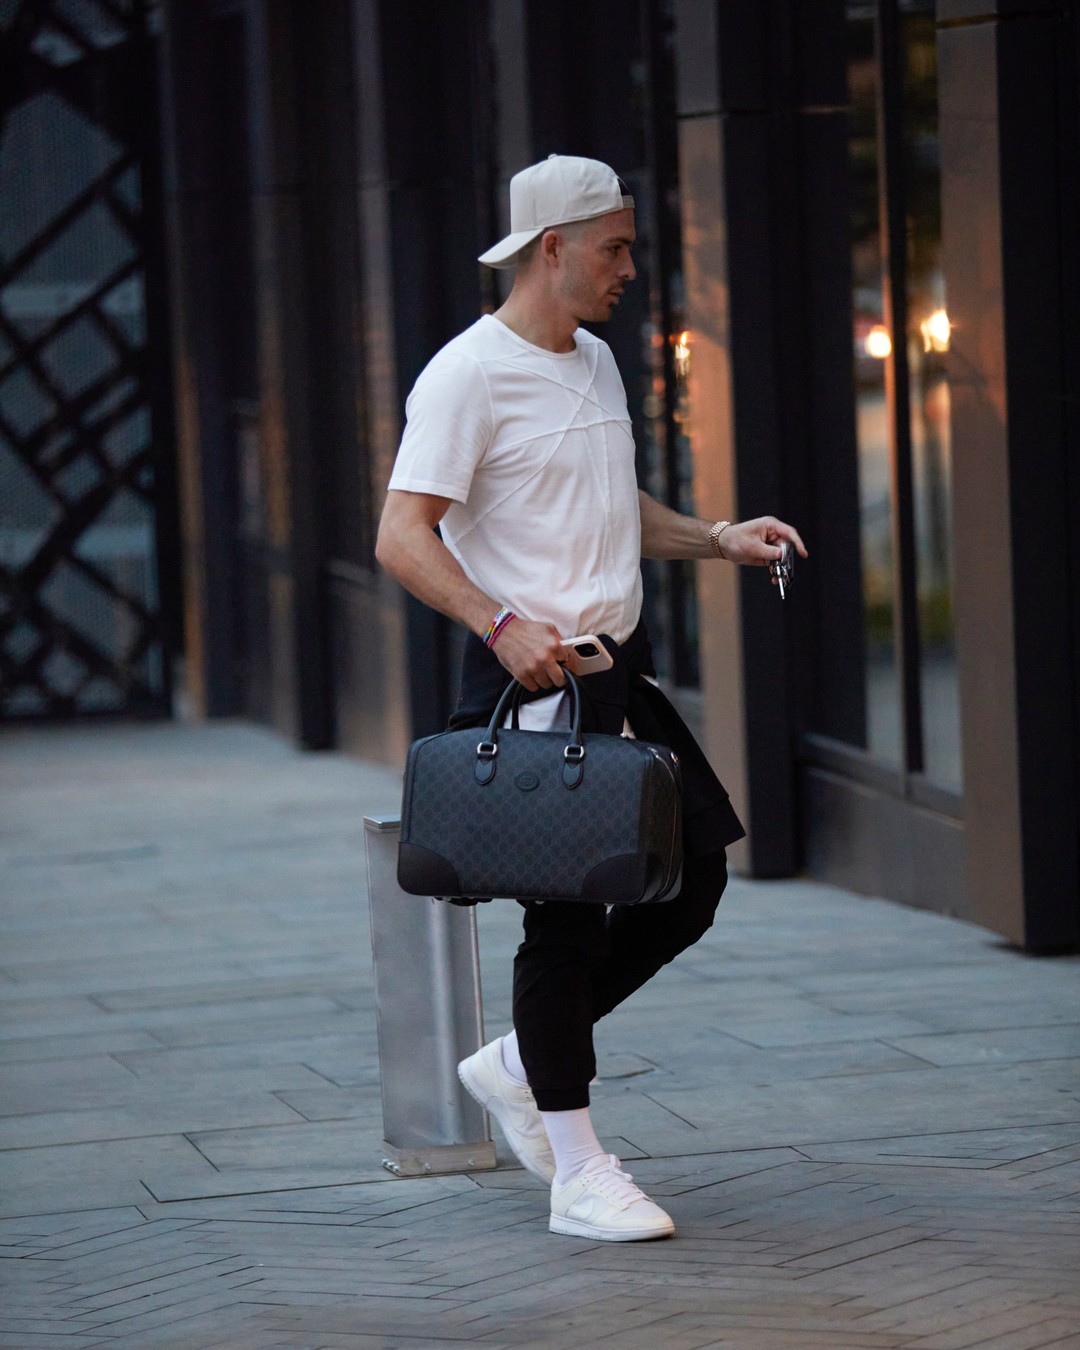 The Most Stylish Footballers